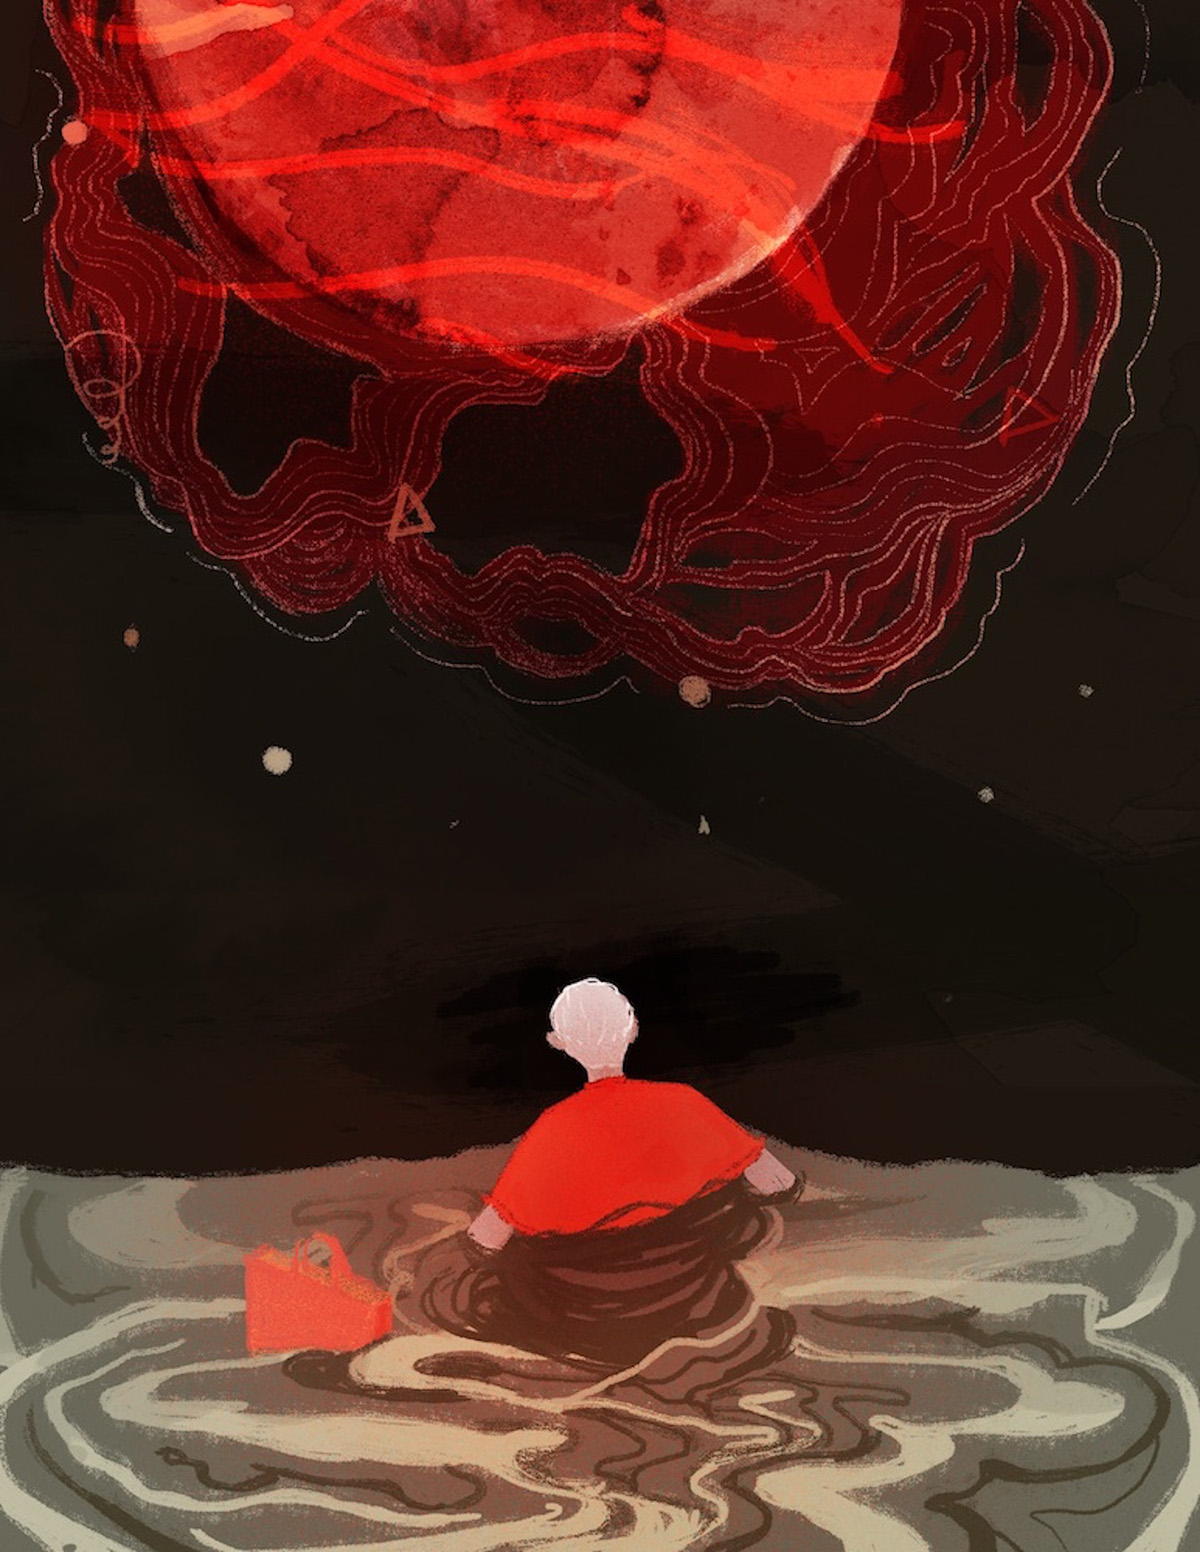 Small, bright figure seen from back floats in dark water next to a red bag; under black sky with big red orb, abstract stars.